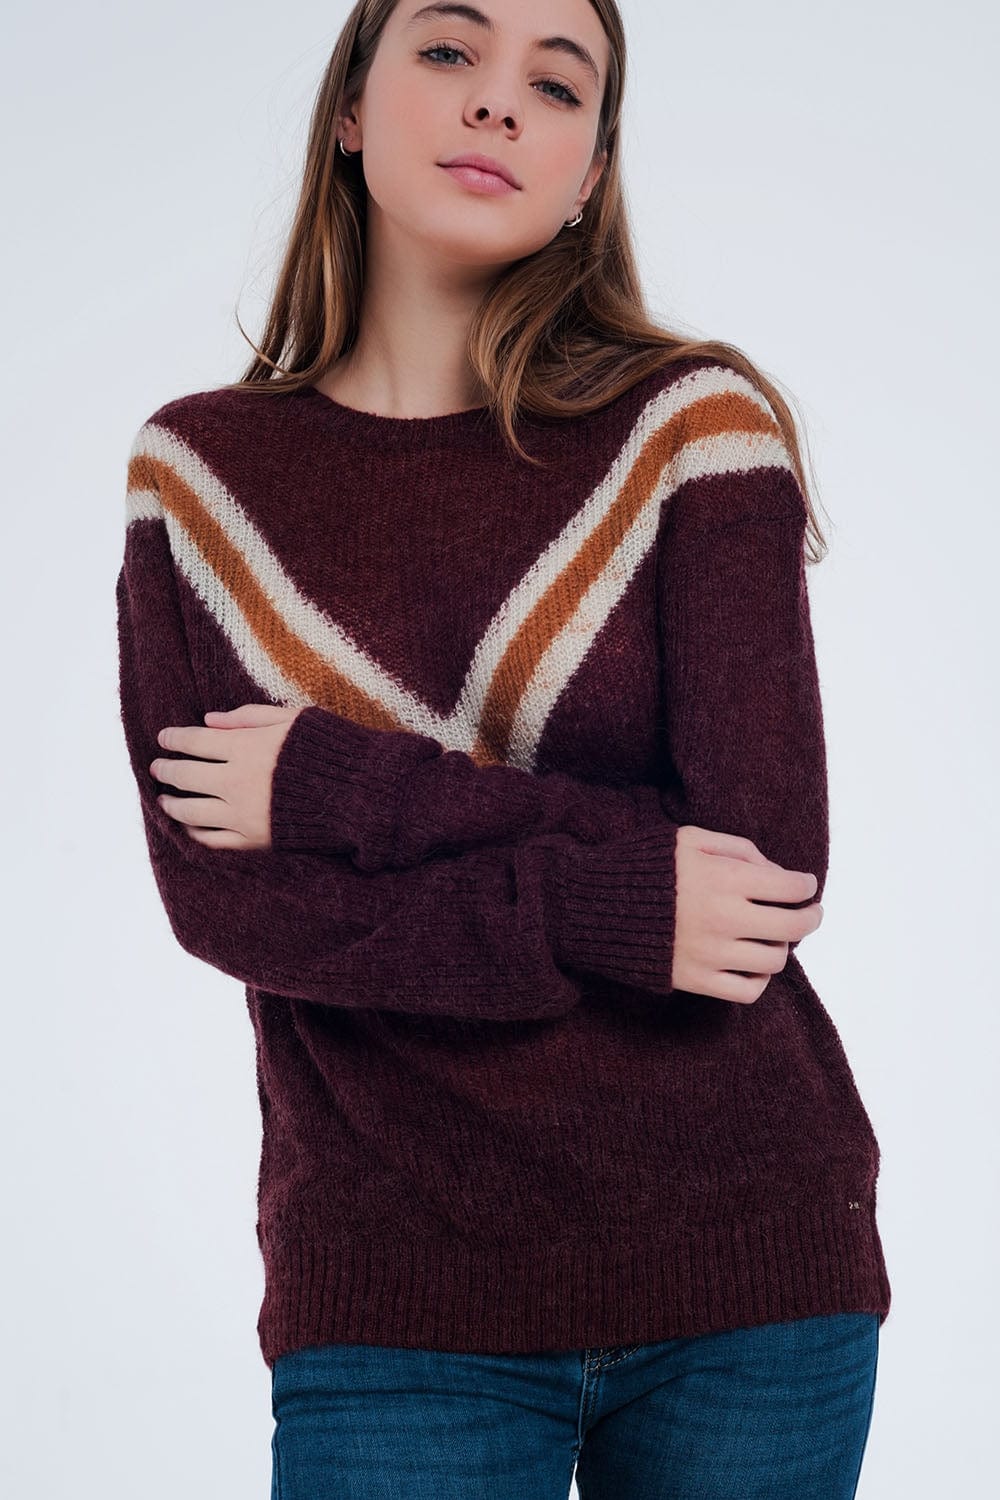 Q2 Women's Sweater Maroon Sweater with Striped Detail